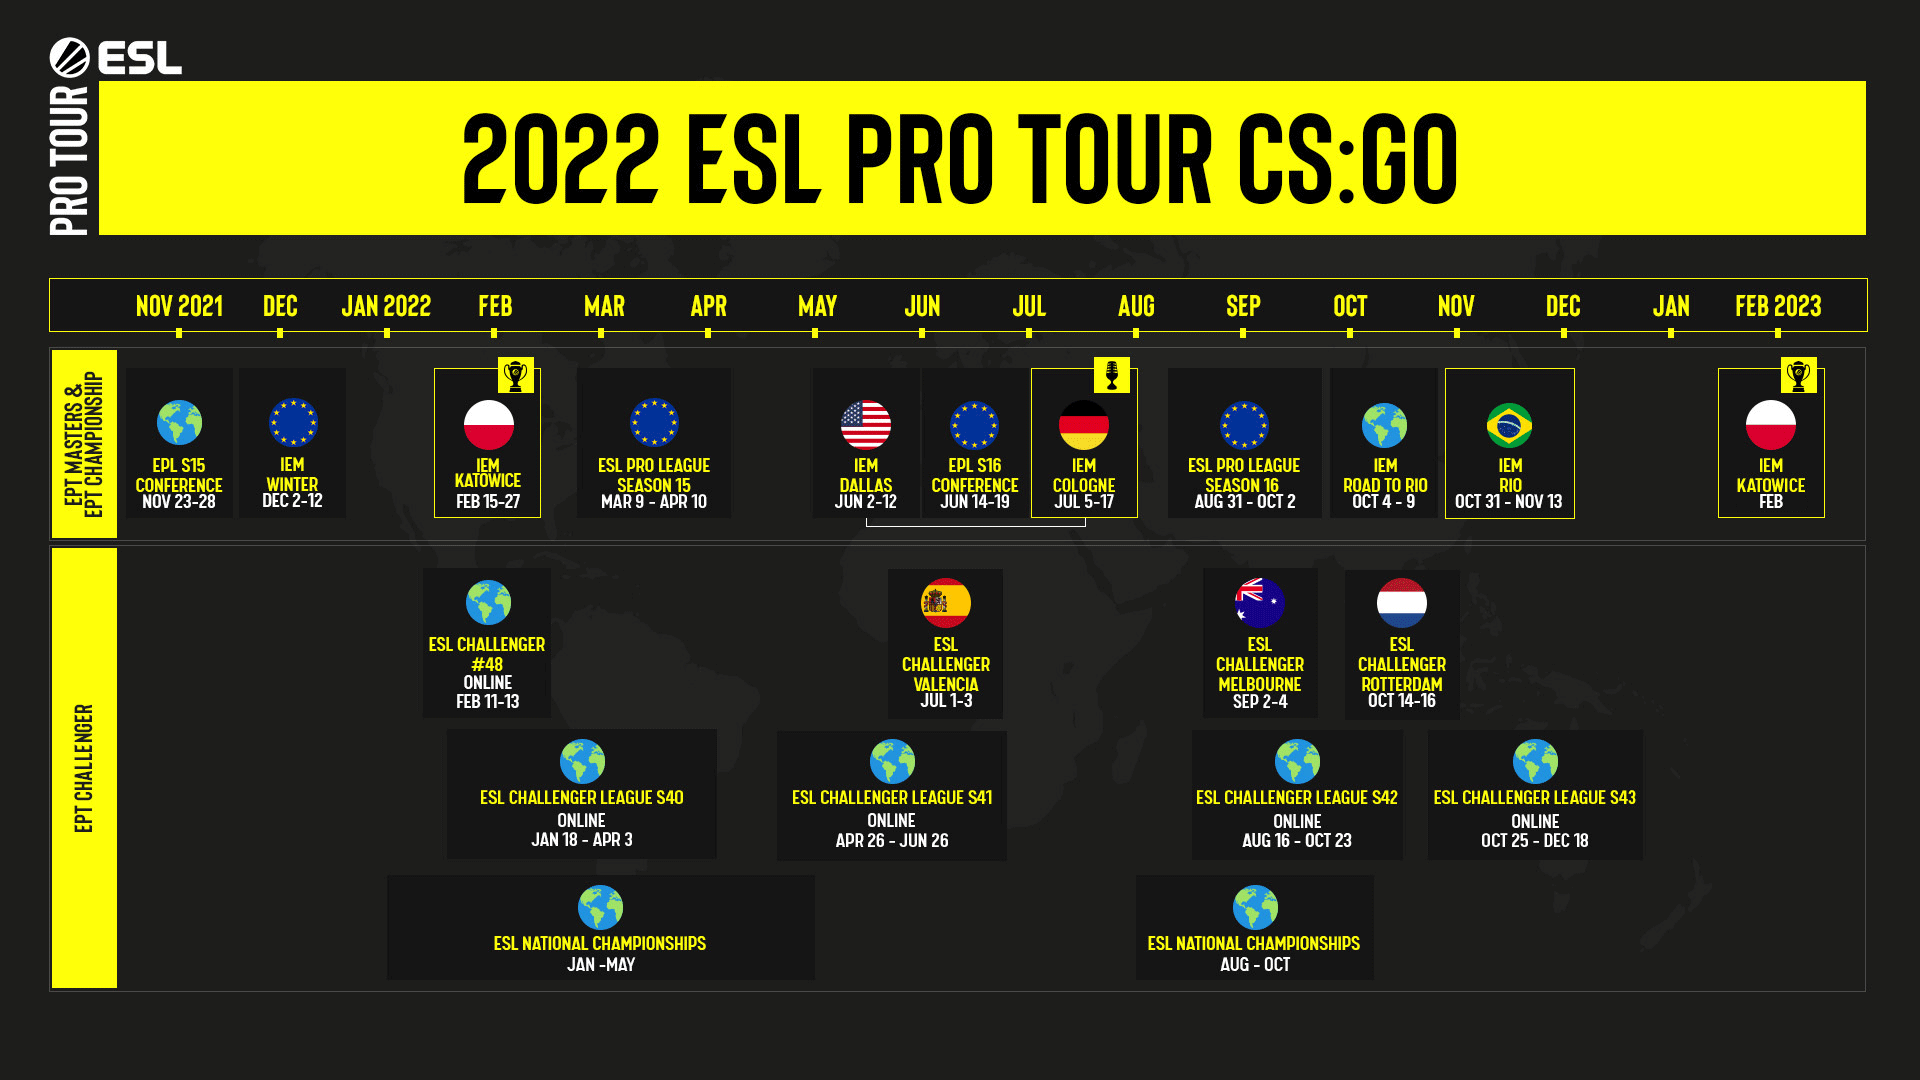 Unveiling our 2022 ESL Pro Tour for Counter-Strike Global Offensive